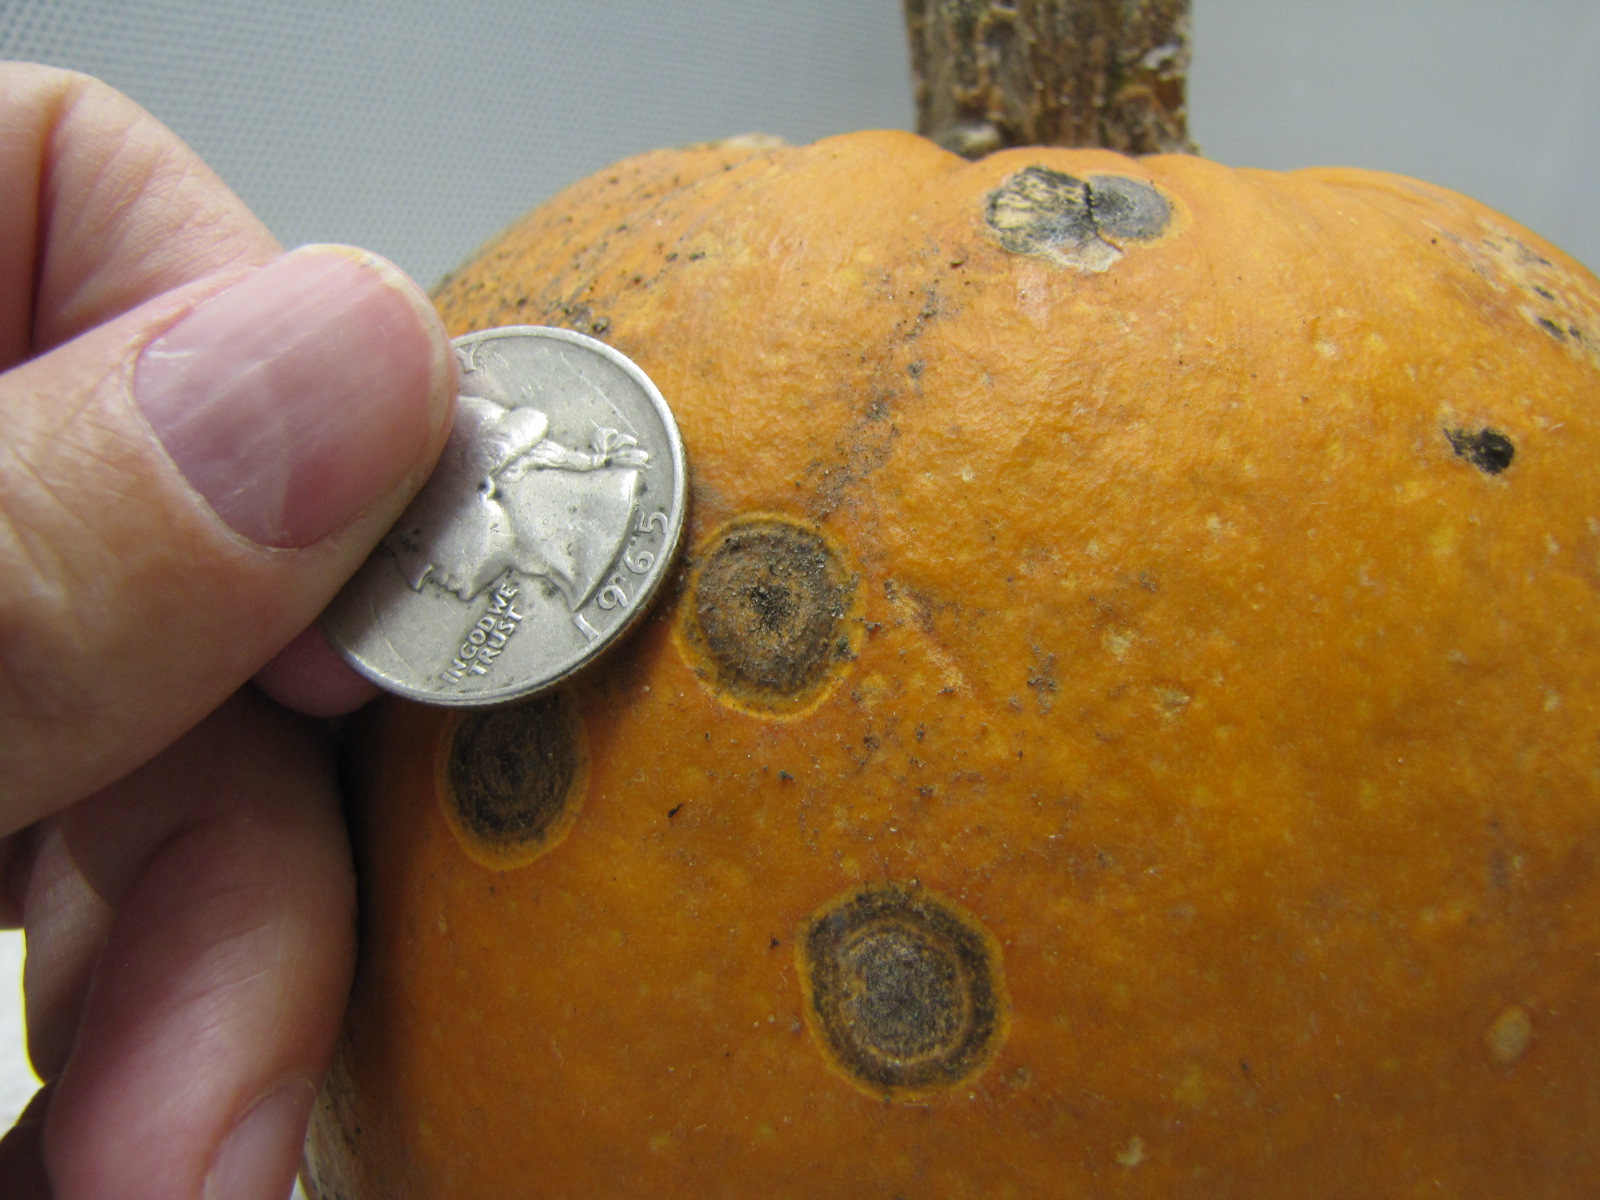 Figure 2. Anthracnose lesion on pumpkin in comparison to a quarter.